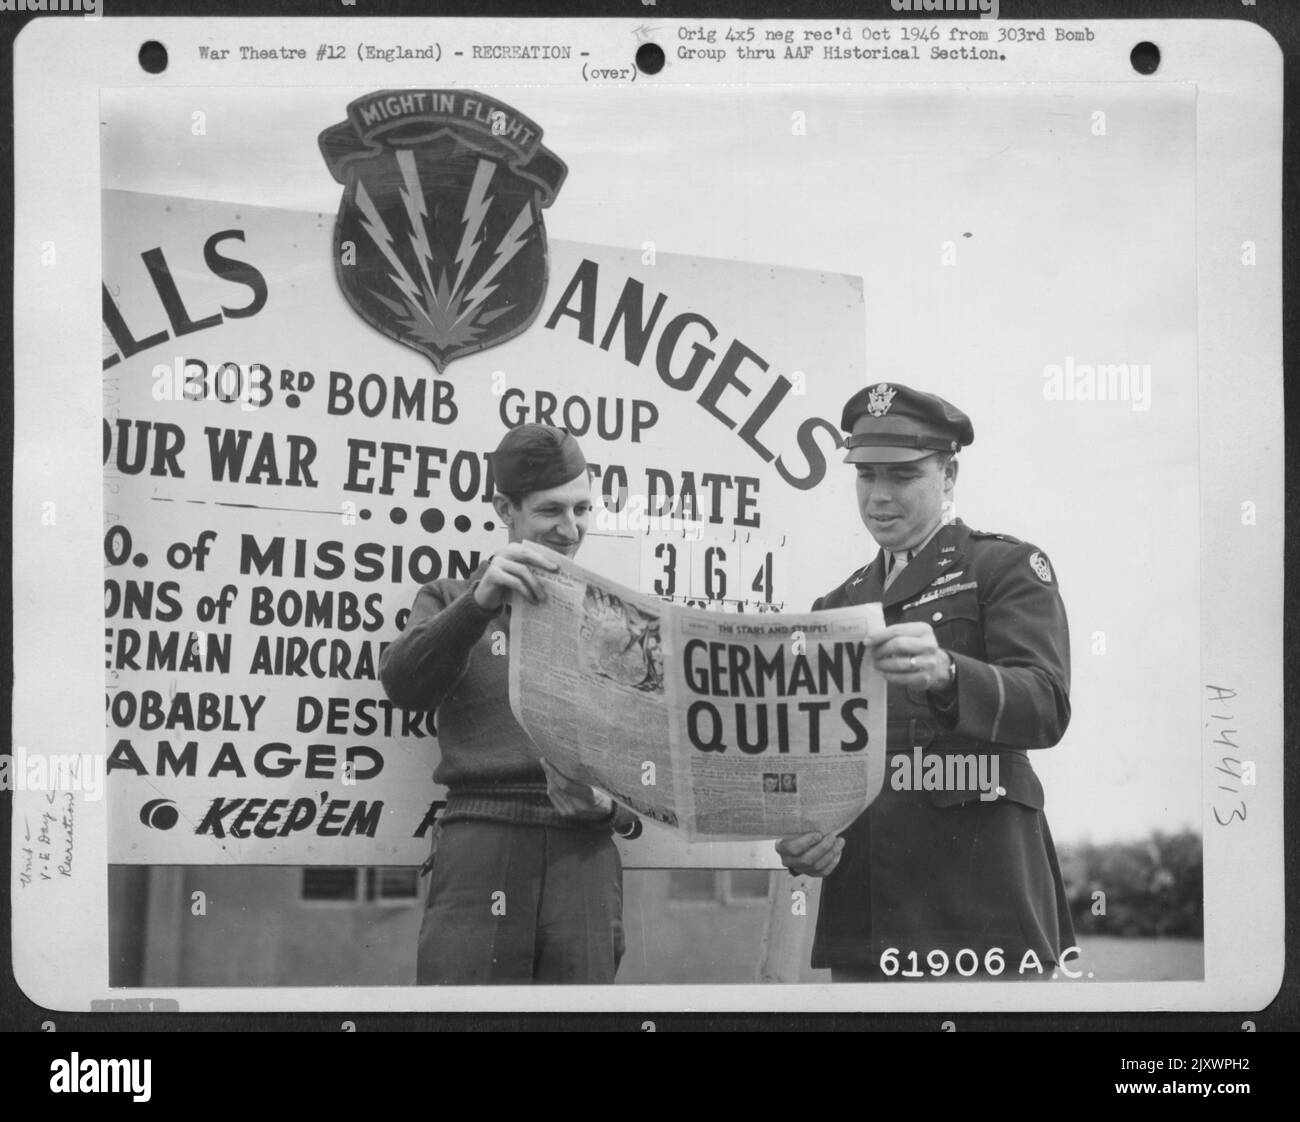 Germany Quits - Tall Black Headlines In The 'Stars And Stripes' Announced The End Of Hostilities In Europe To Two Crew Members Of The 303Rd Bomb Group. In The Background Is A Chart Showing The Operational Record Of The 'Hell'S Angels'. England. 8 May 1 Stock Photo